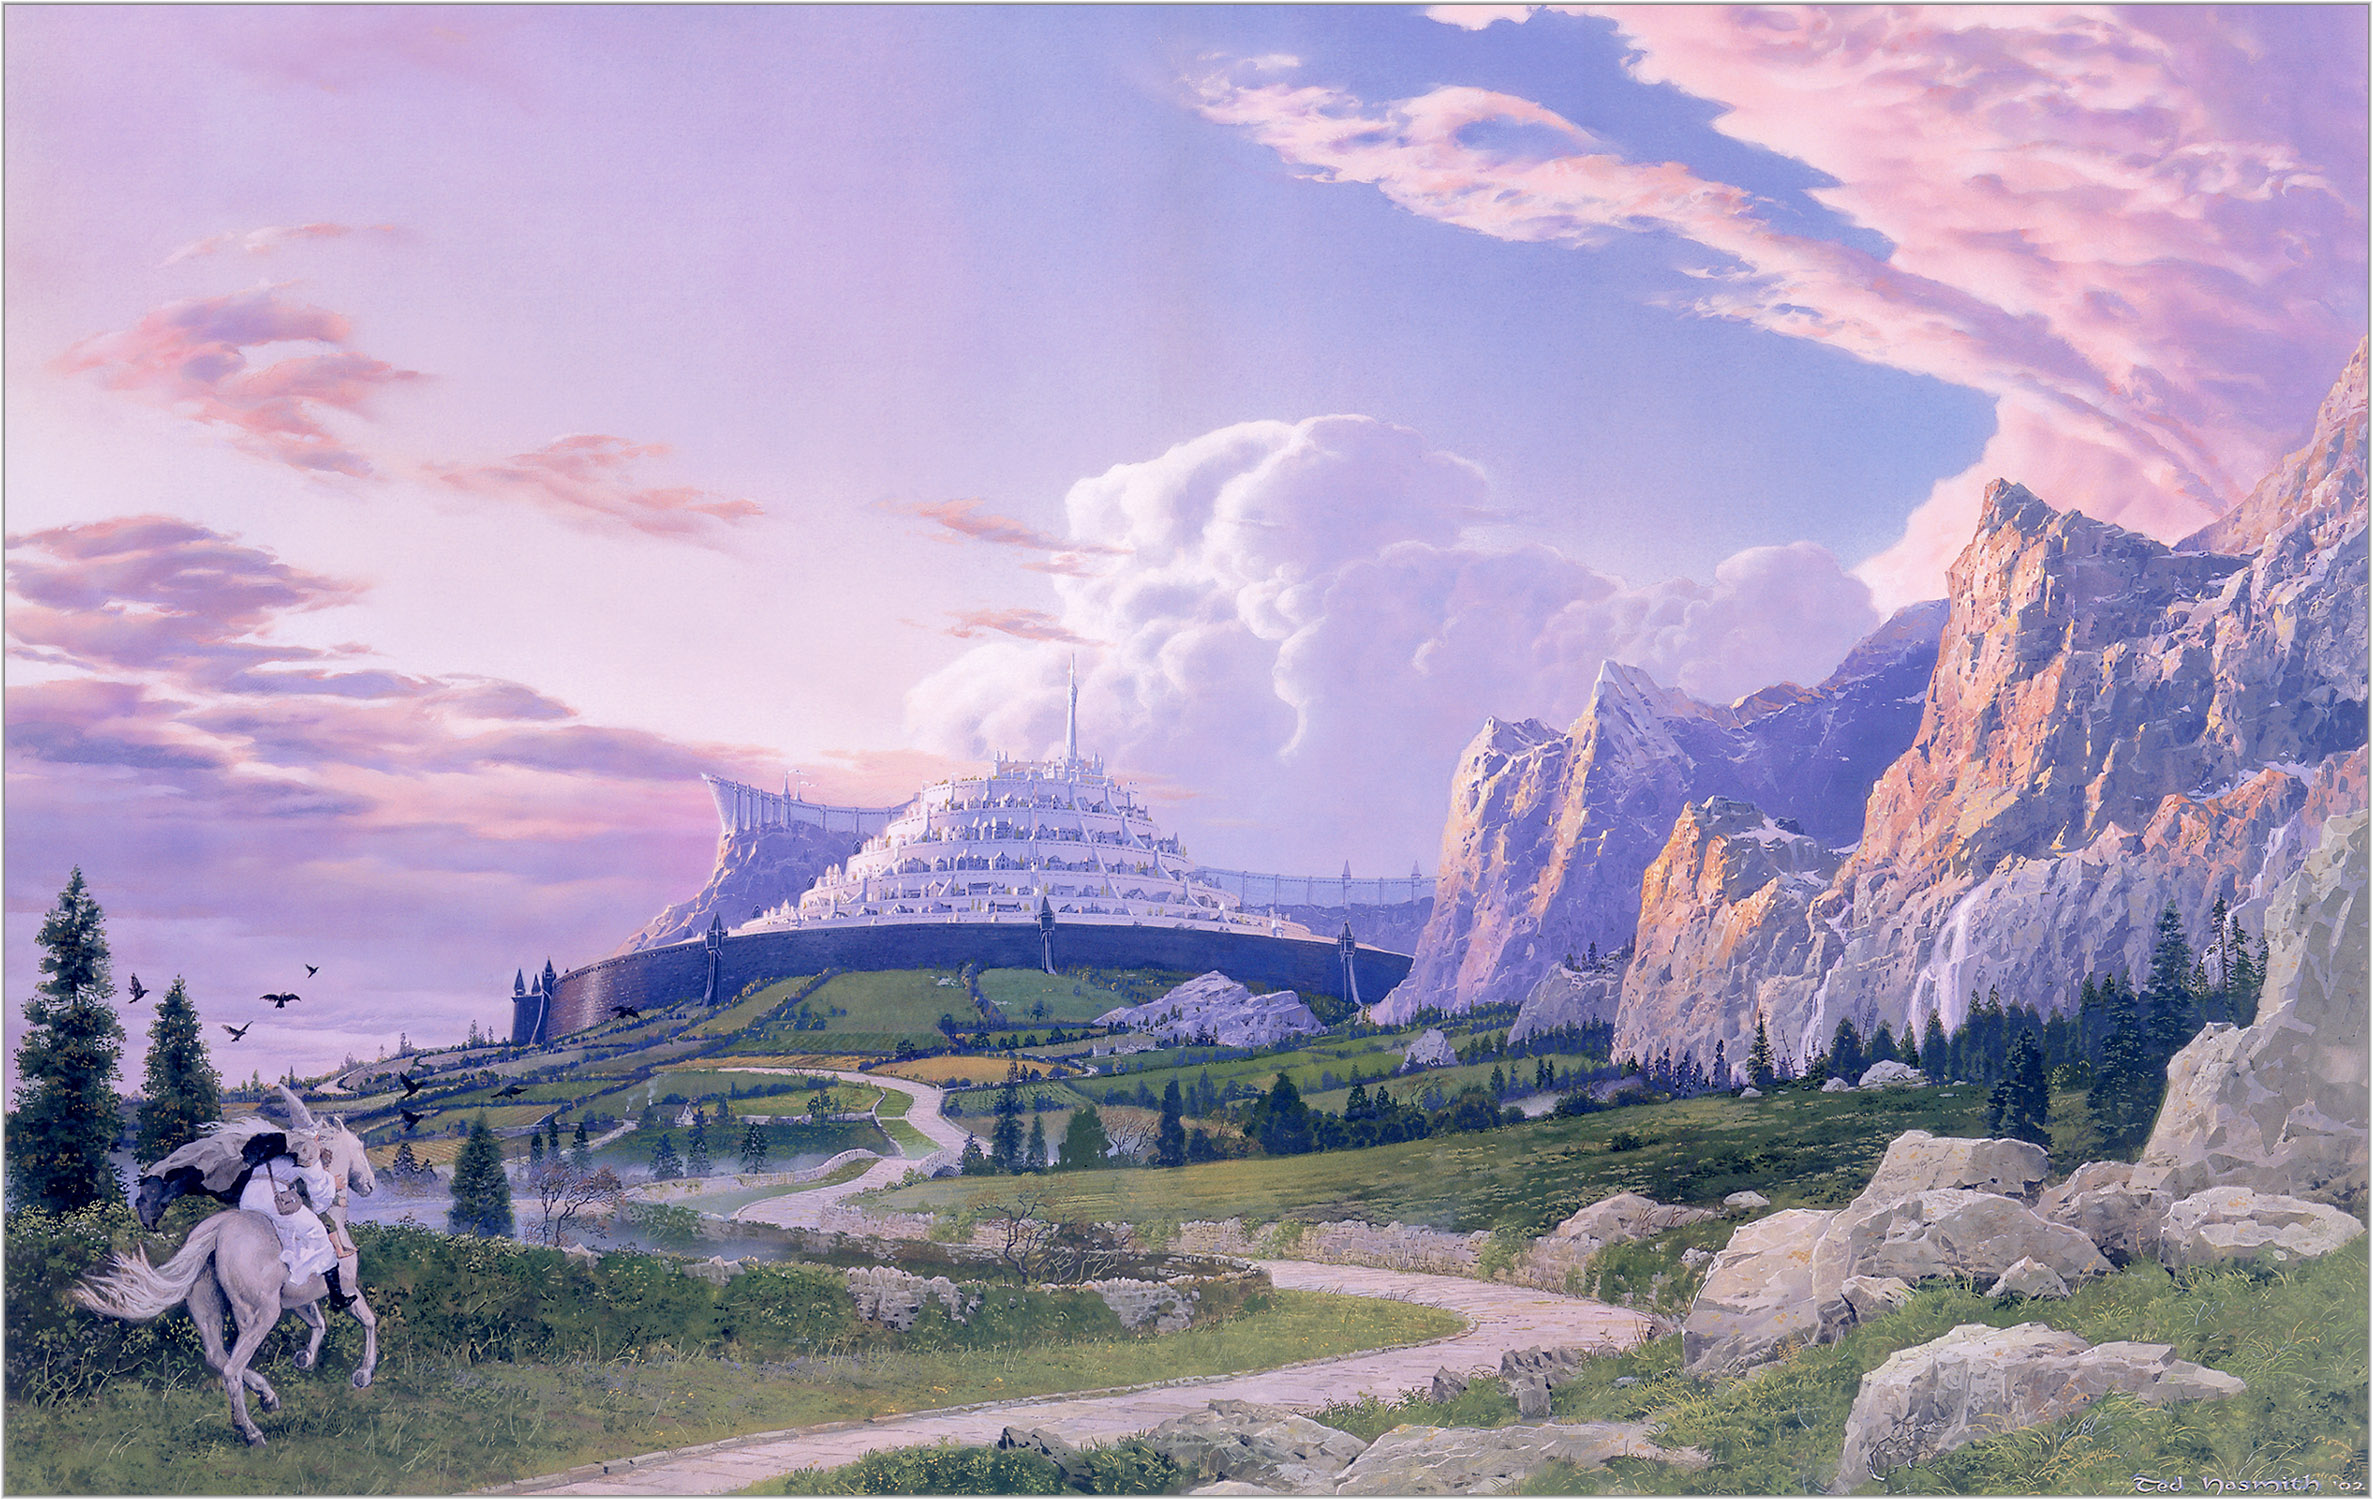 Minas Tirith (First Age), The One Wiki to Rule Them All